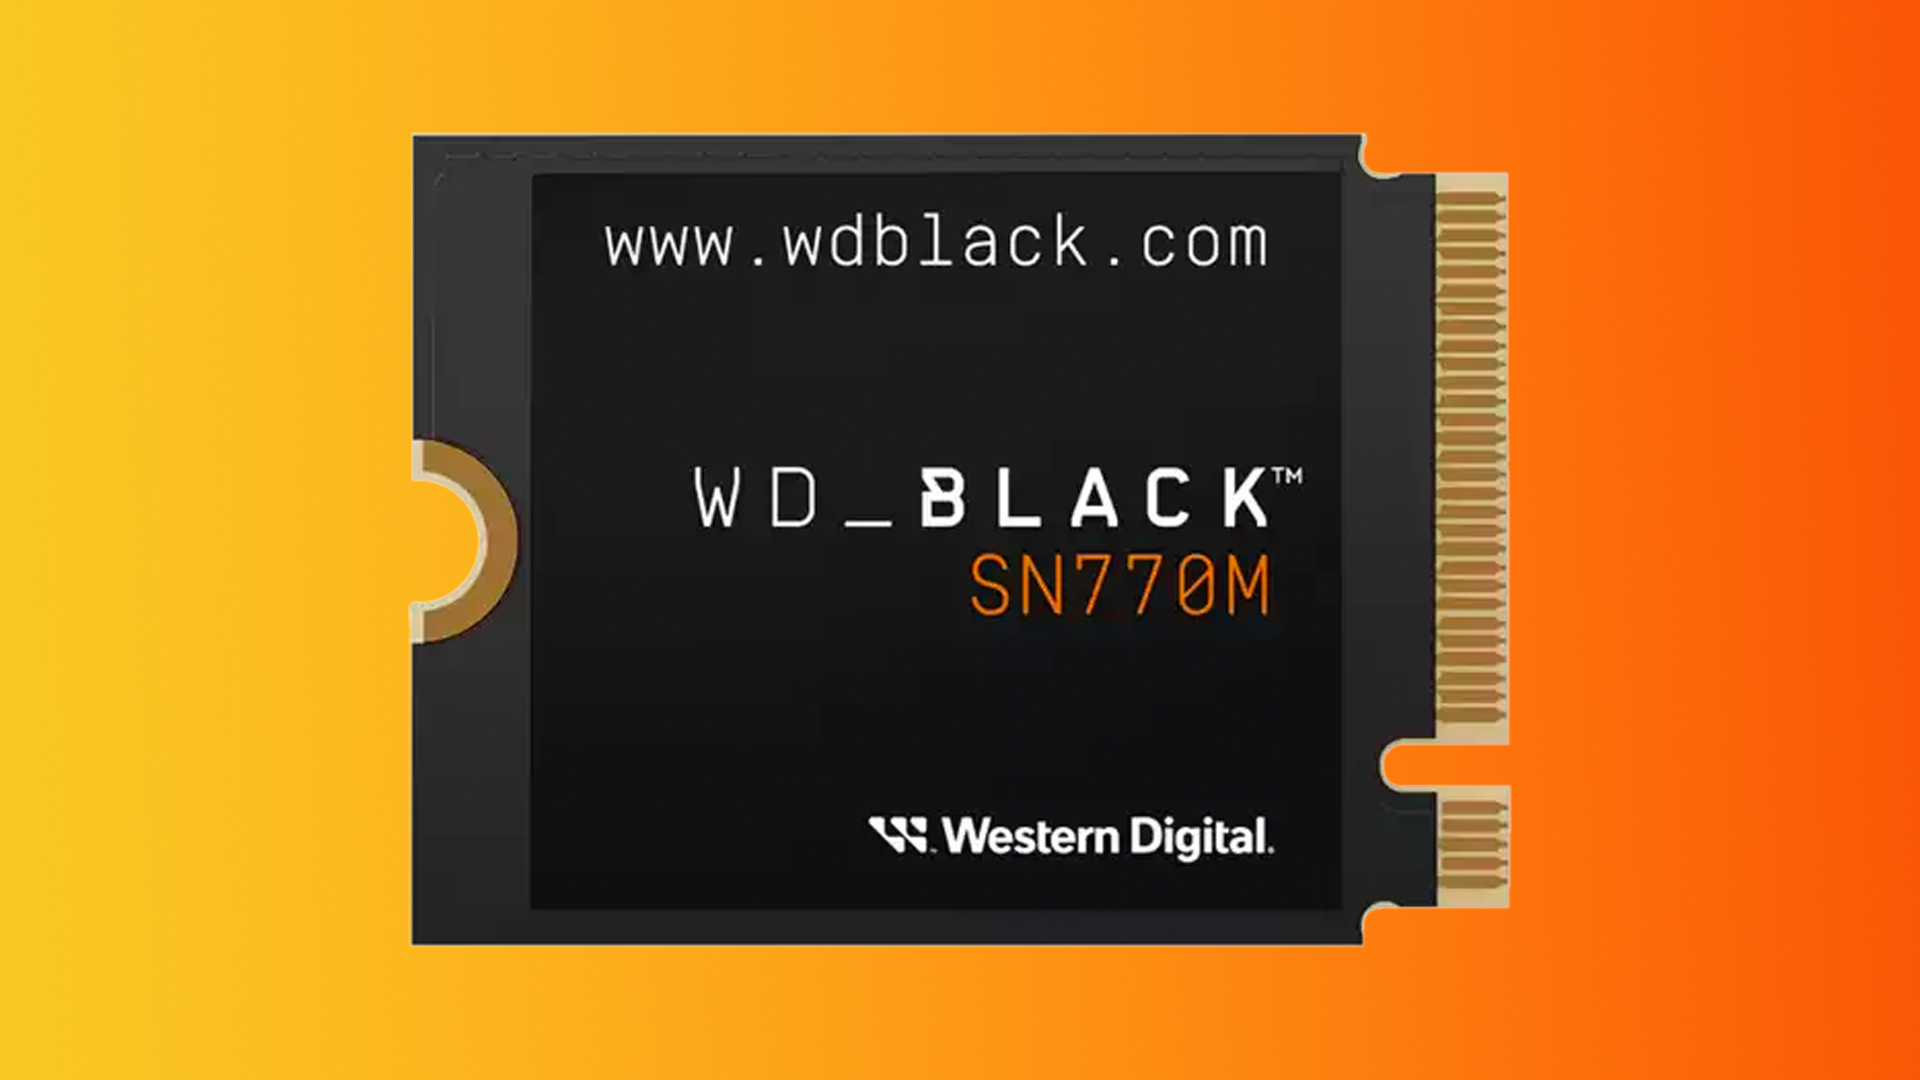 This 2TB WD SN770M SSD is £135 from Amazon, and is ideal for your Steam Deck